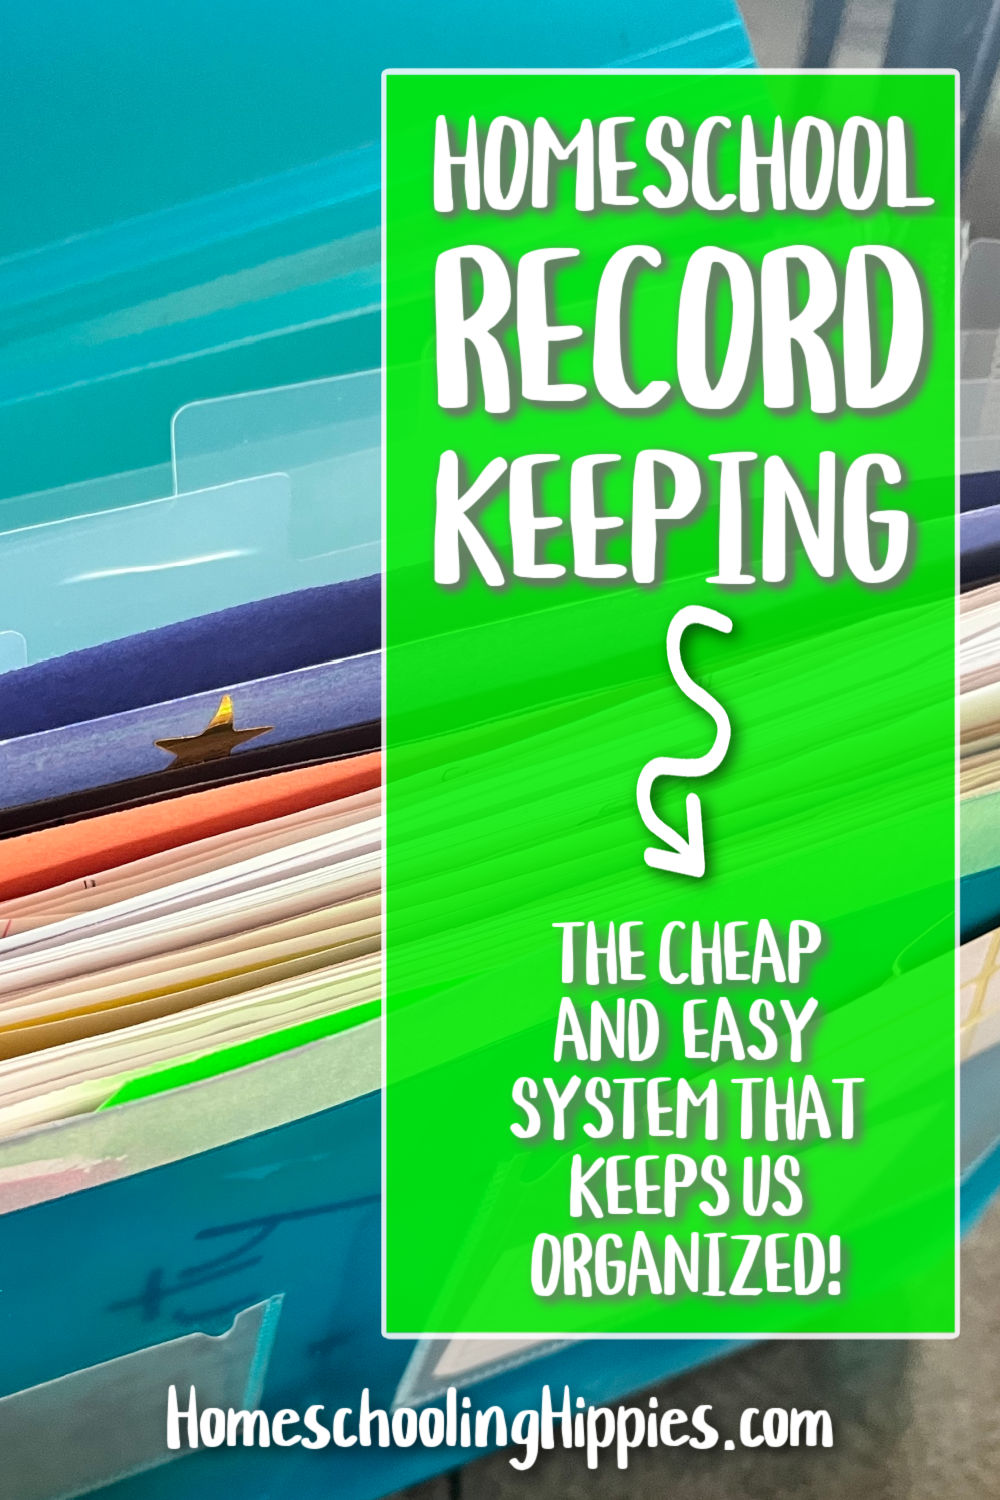 Text: Homeschool Record Keeping: The Cheap and Easy System that Keeps Us Organized - HomeschoolingHippies.com Image: Colorful papers in an accordion folder